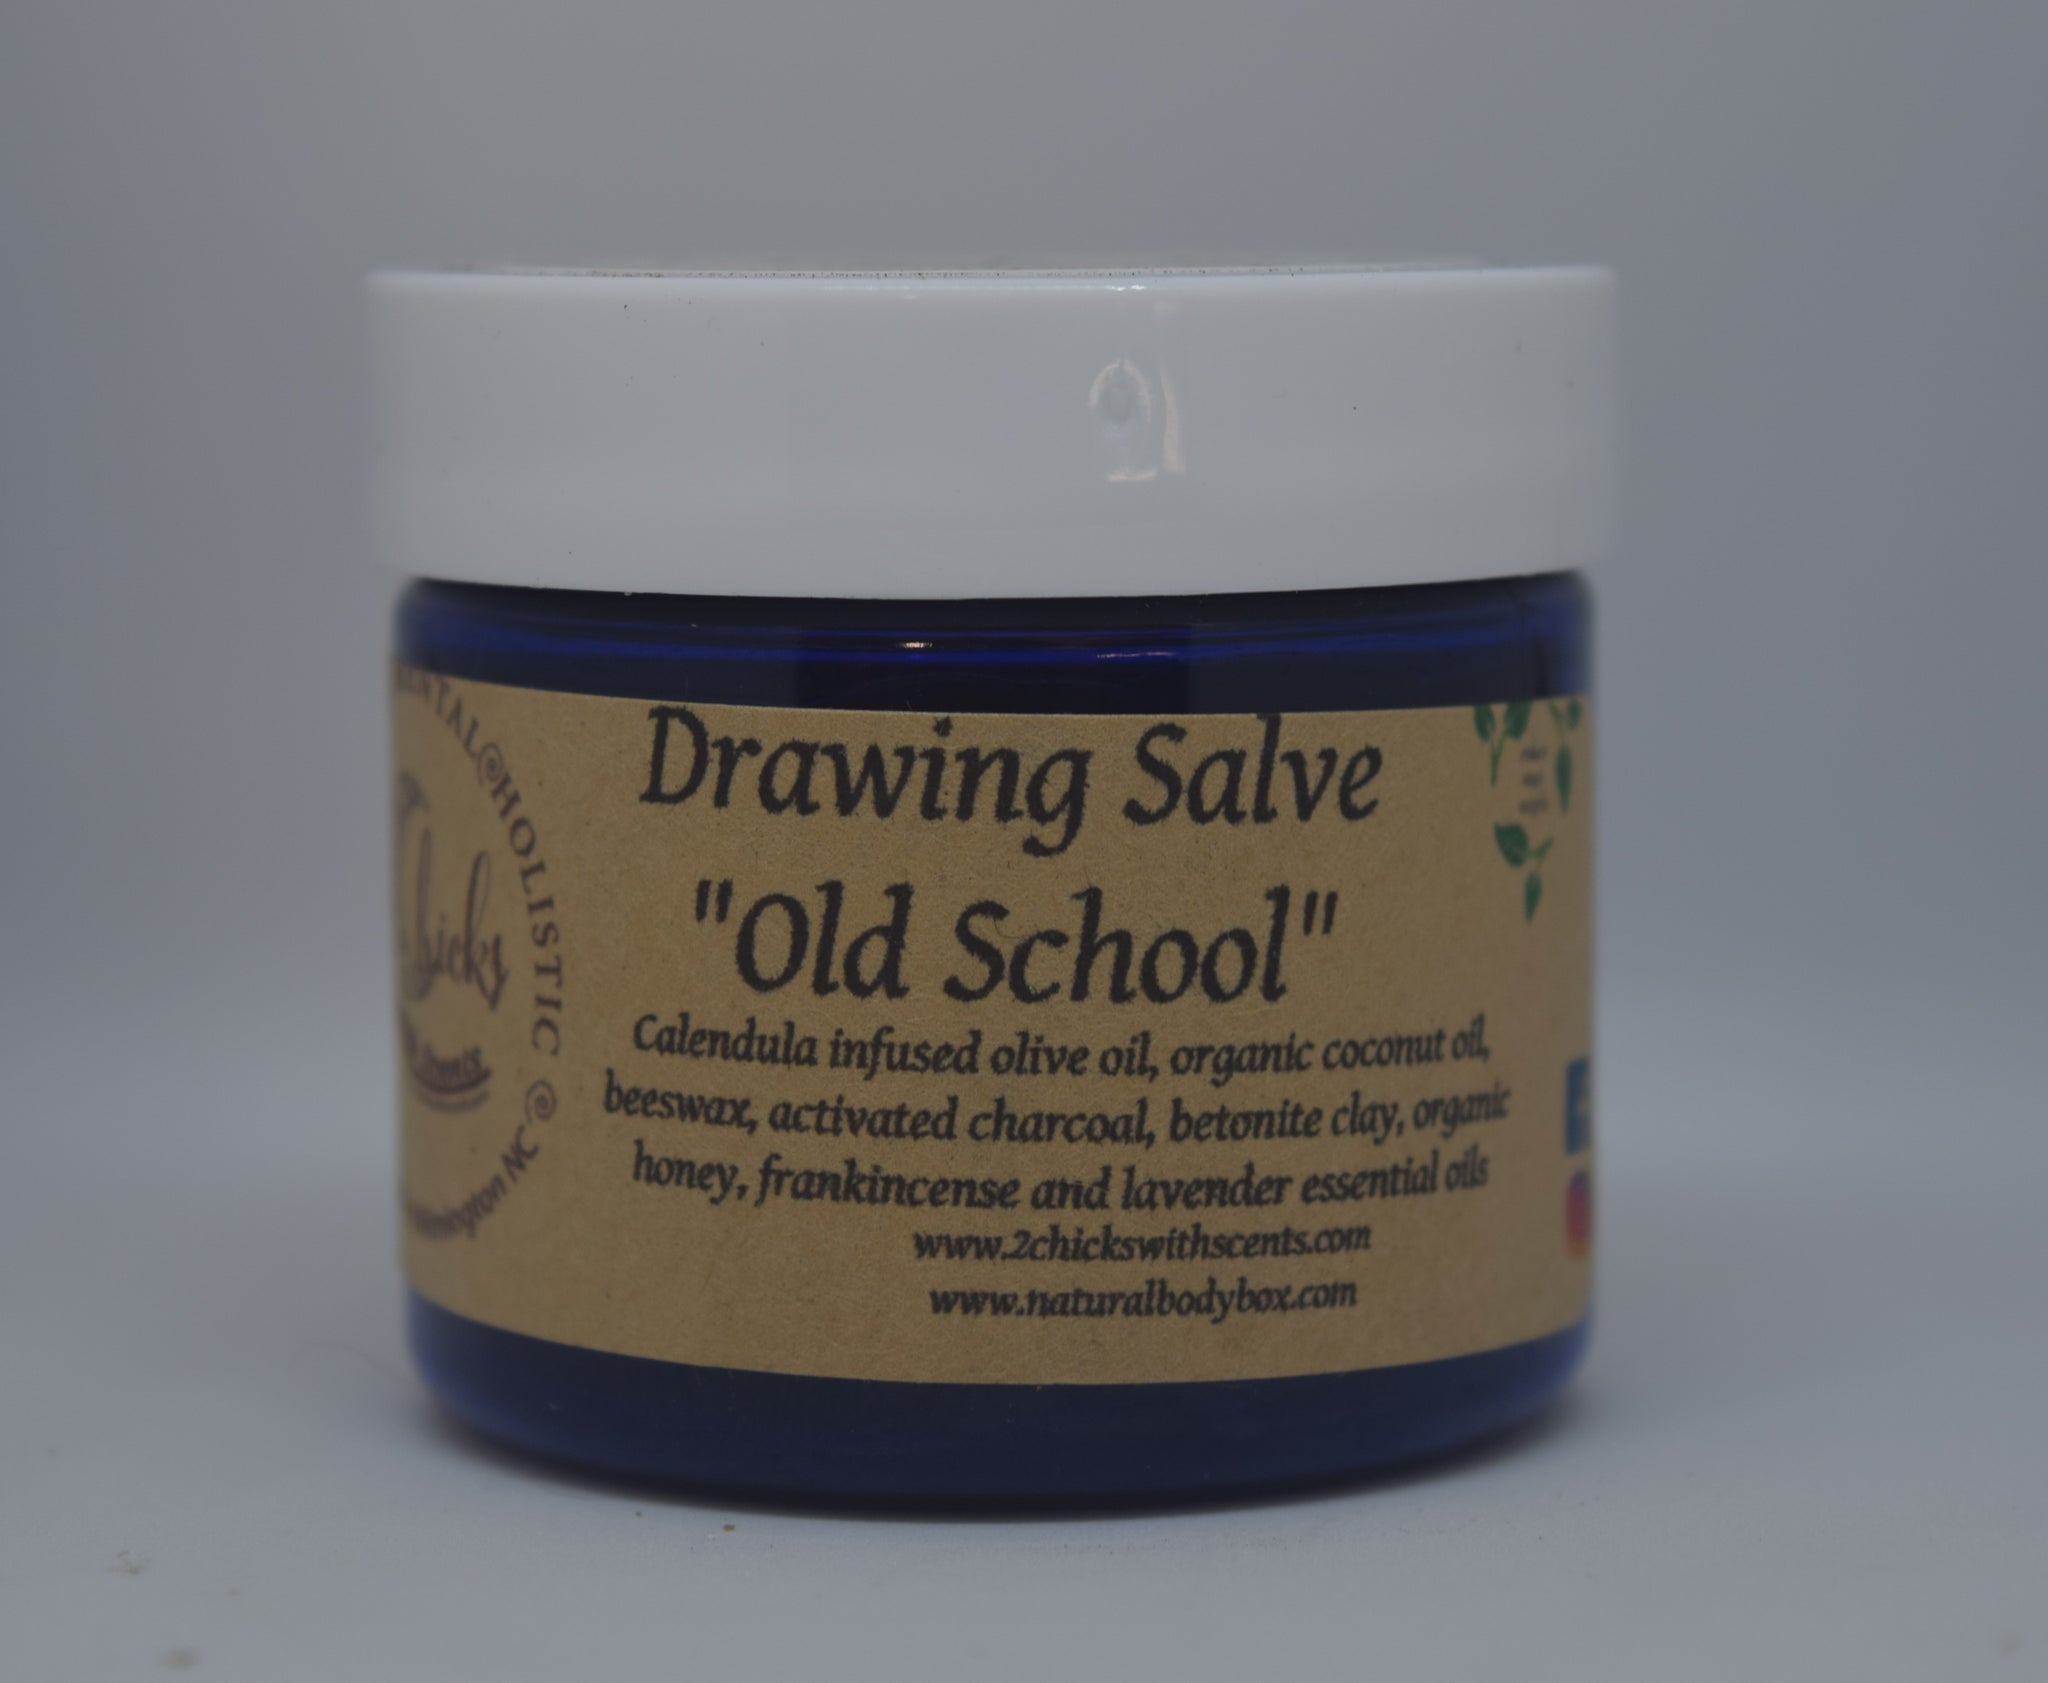 Prid Drawing Salve, An Old School Apothecary Remedy